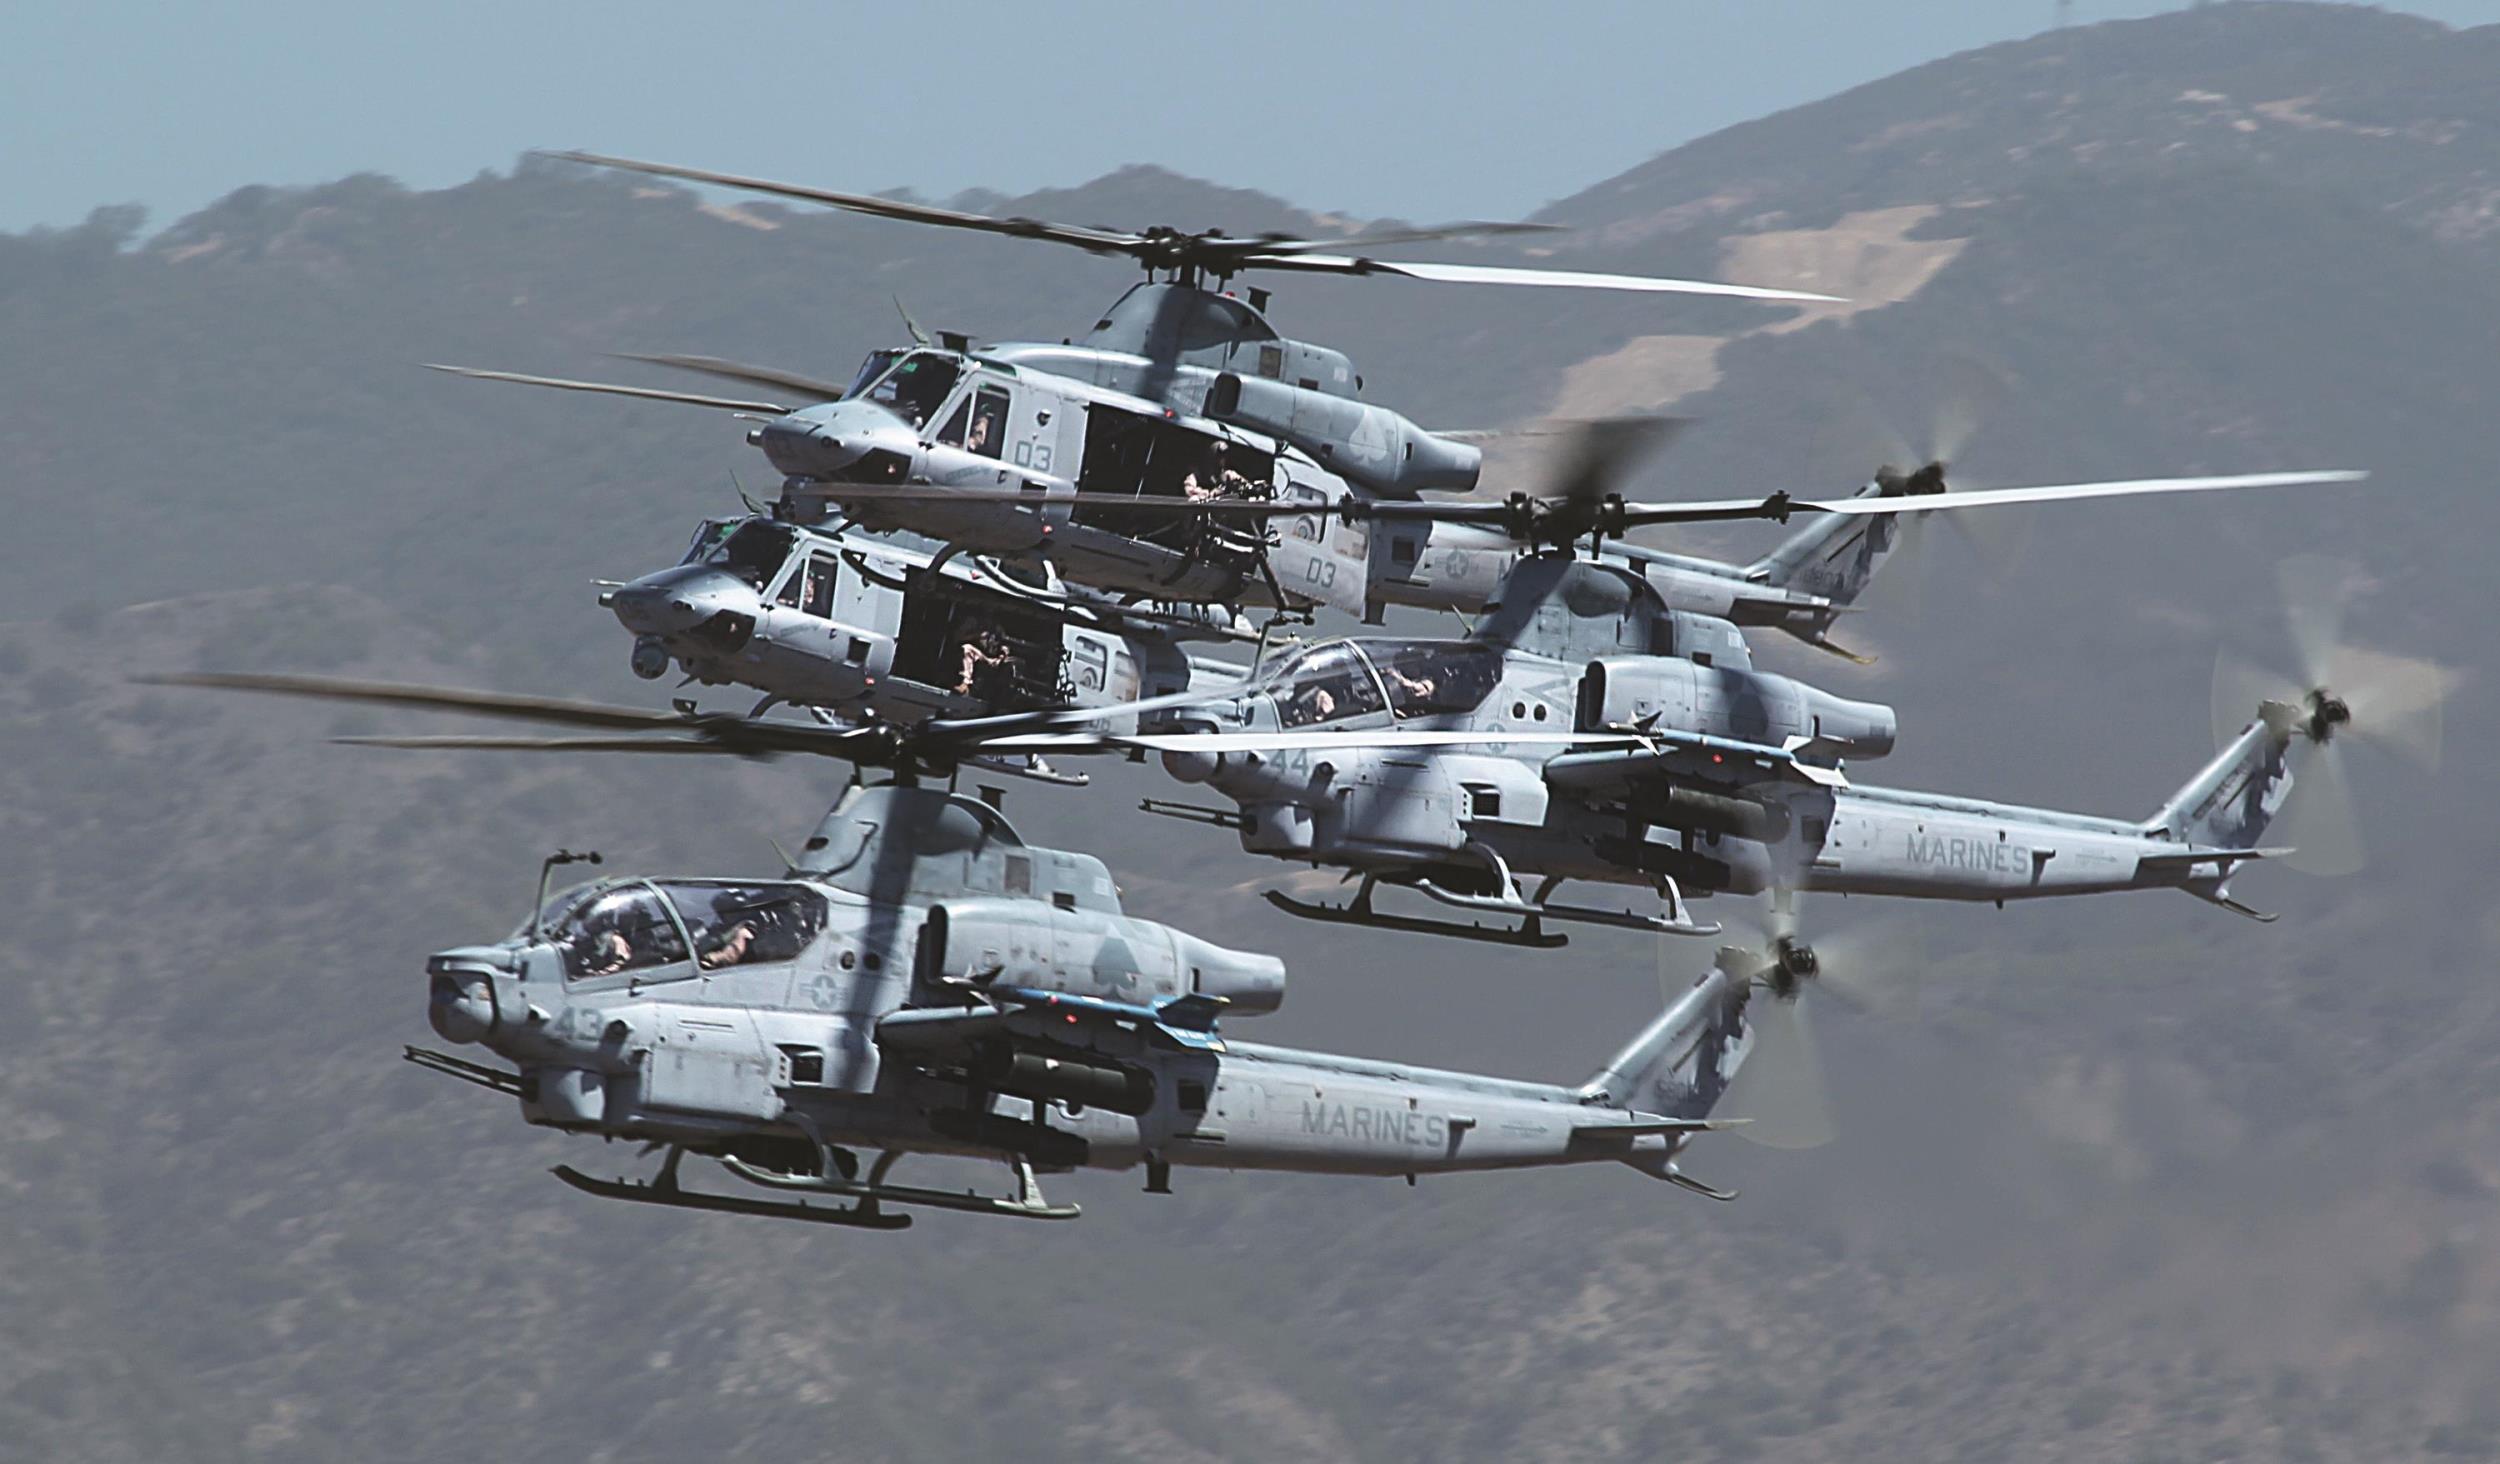 The Czech Ministry of Defence (MoD) has announced its decision to procure a number of U.S. H-1 family of helicopters, which are manufactured by Bell. The contract will cover acquisition of four AH-1Z Viper attack and eight UH-1Y Venom utility/multirole helicopters.